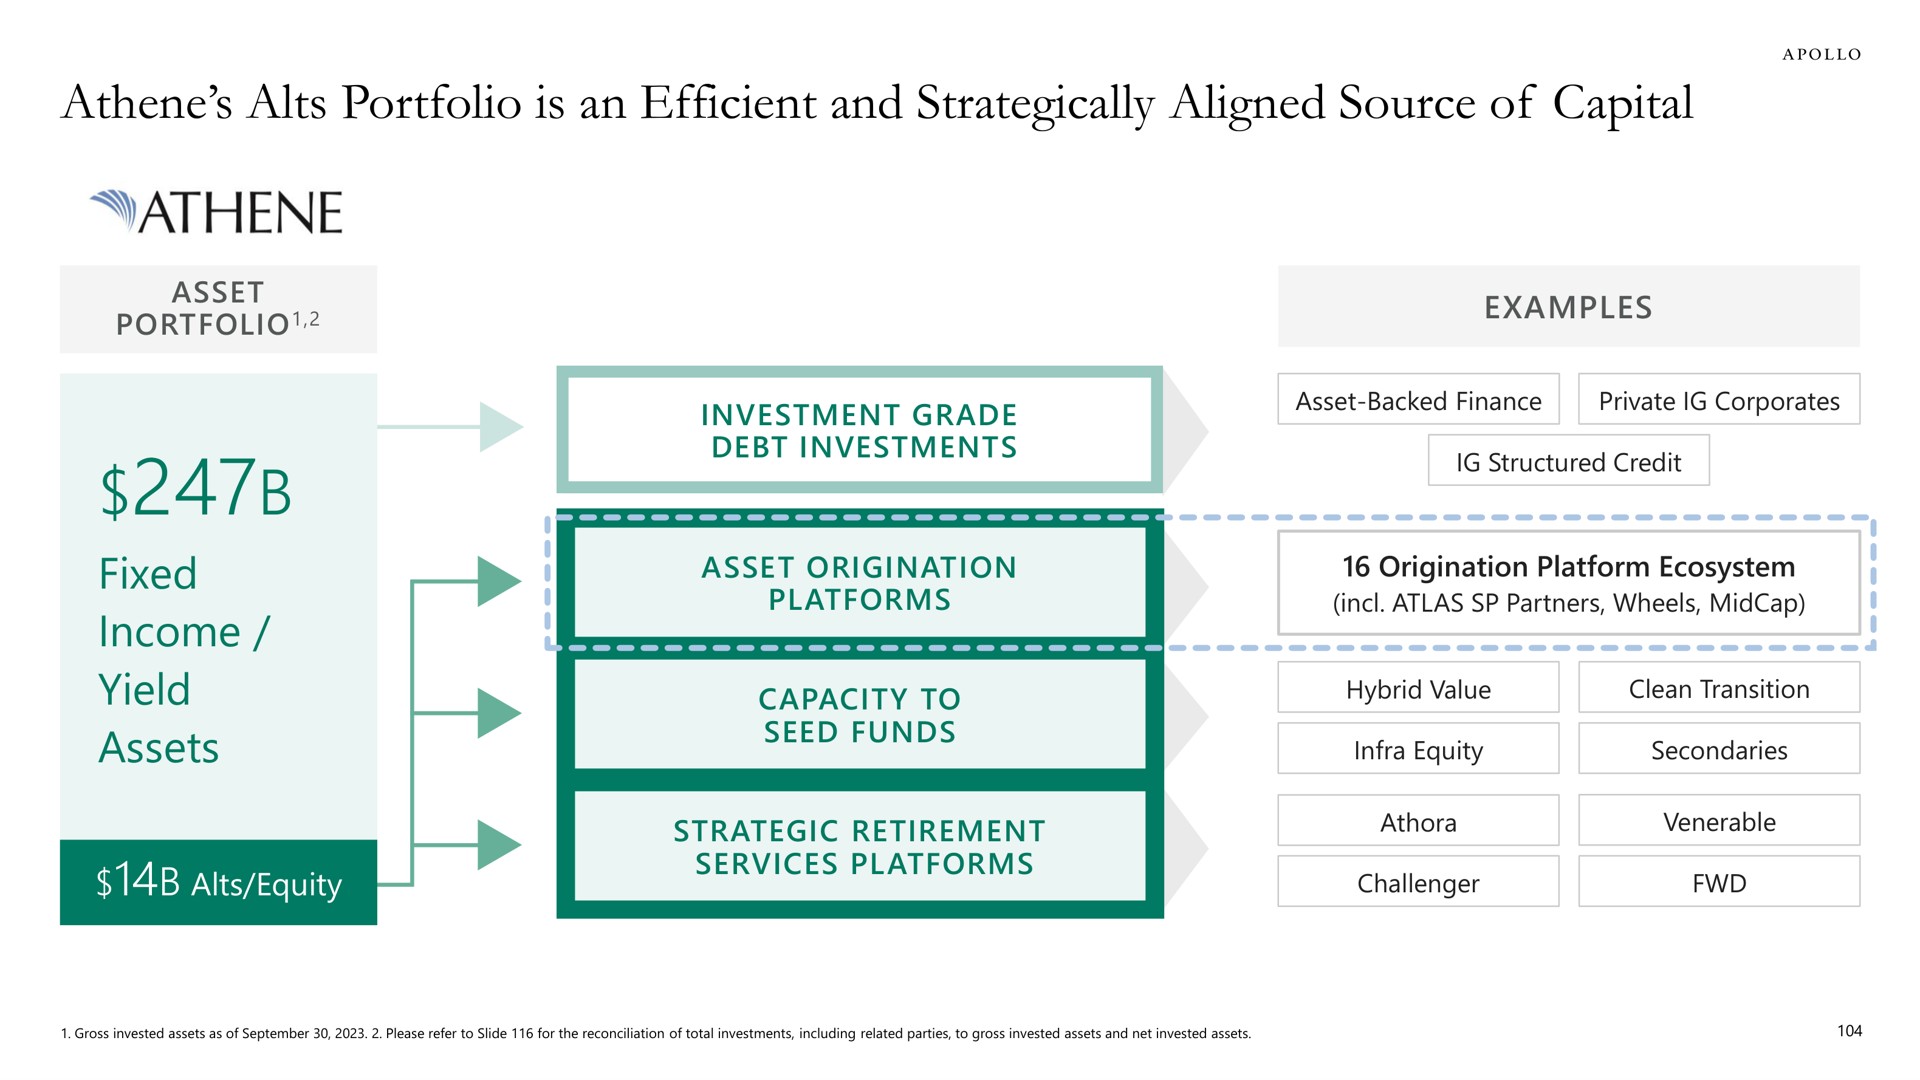 alts portfolio is an efficient and strategically aligned source of capital | Apollo Global Management